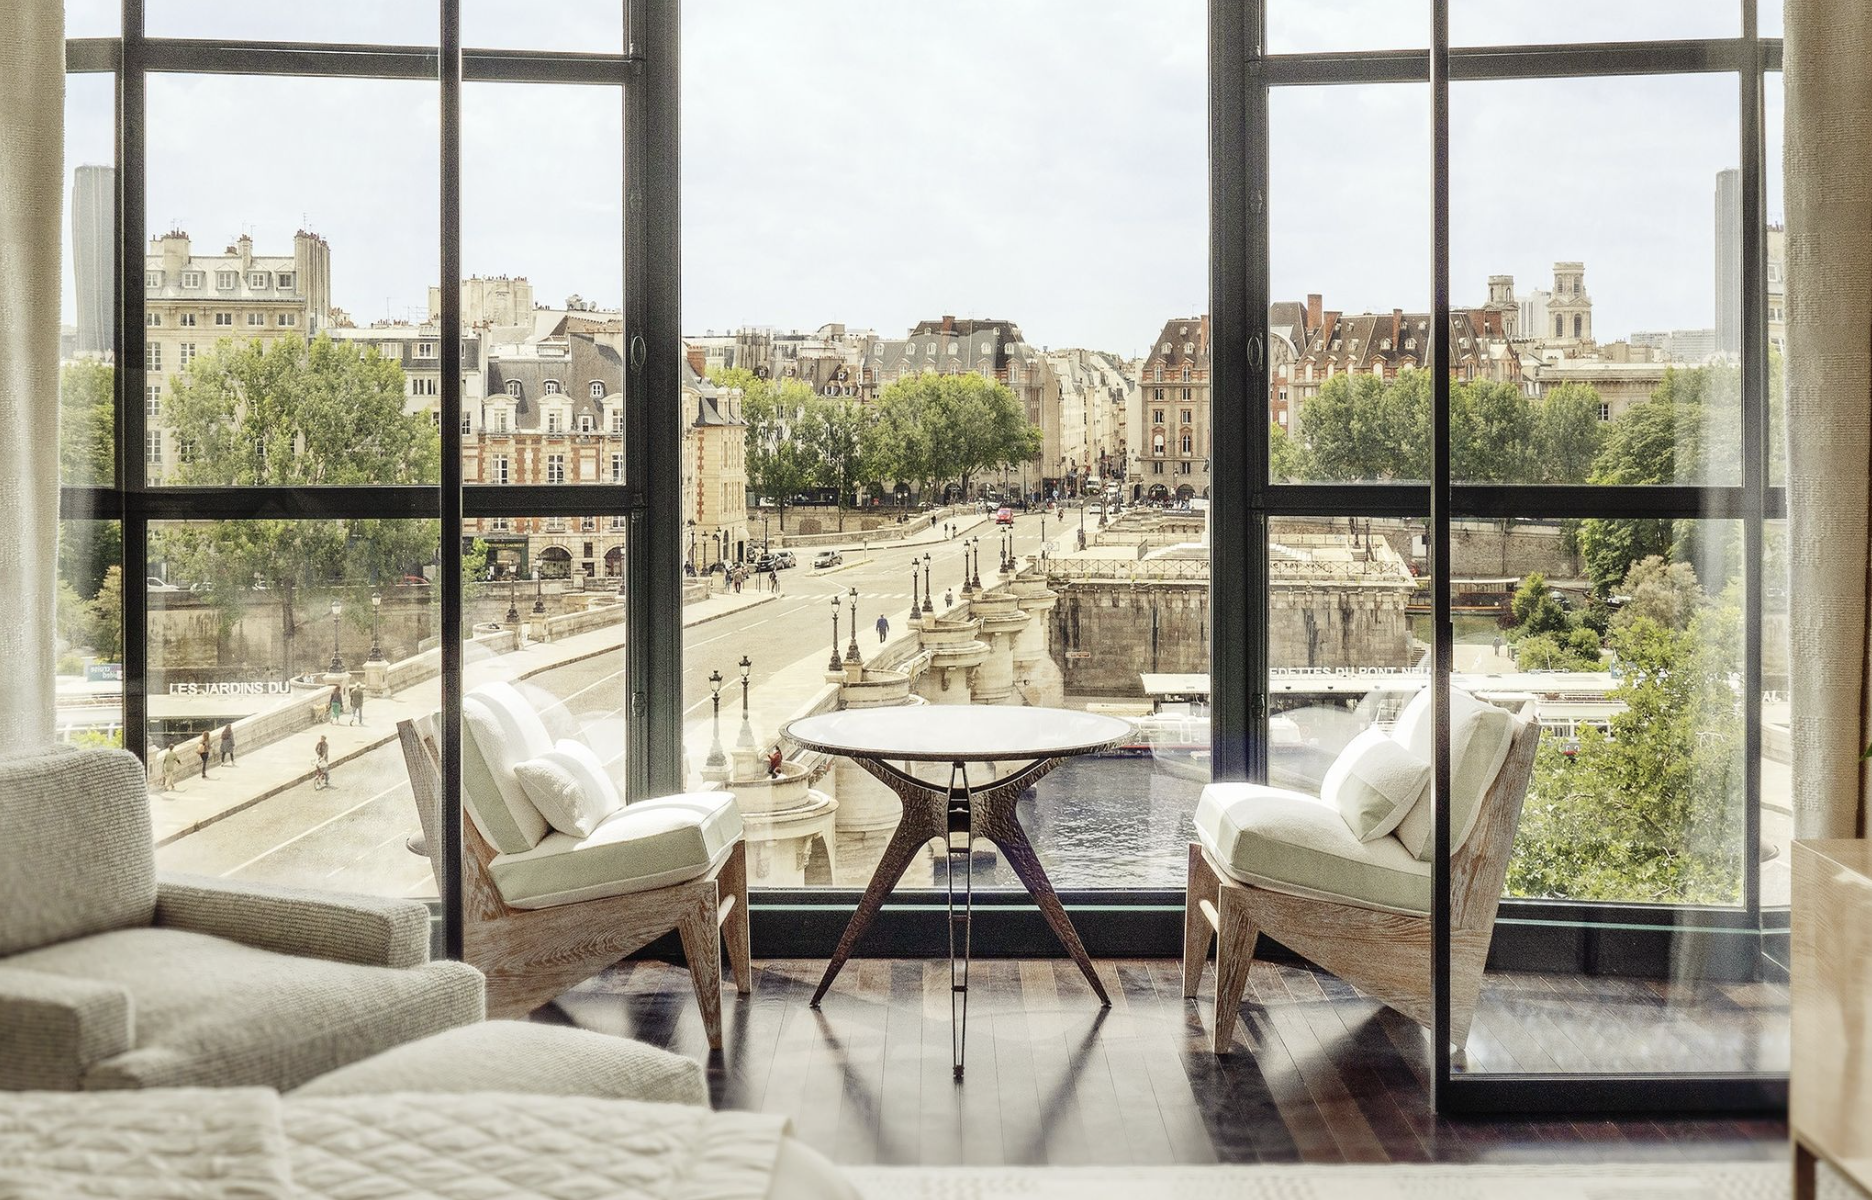 One of the Best Hotels in Paris Just Opened a New Club and Spa — We Got a  First Look Inside